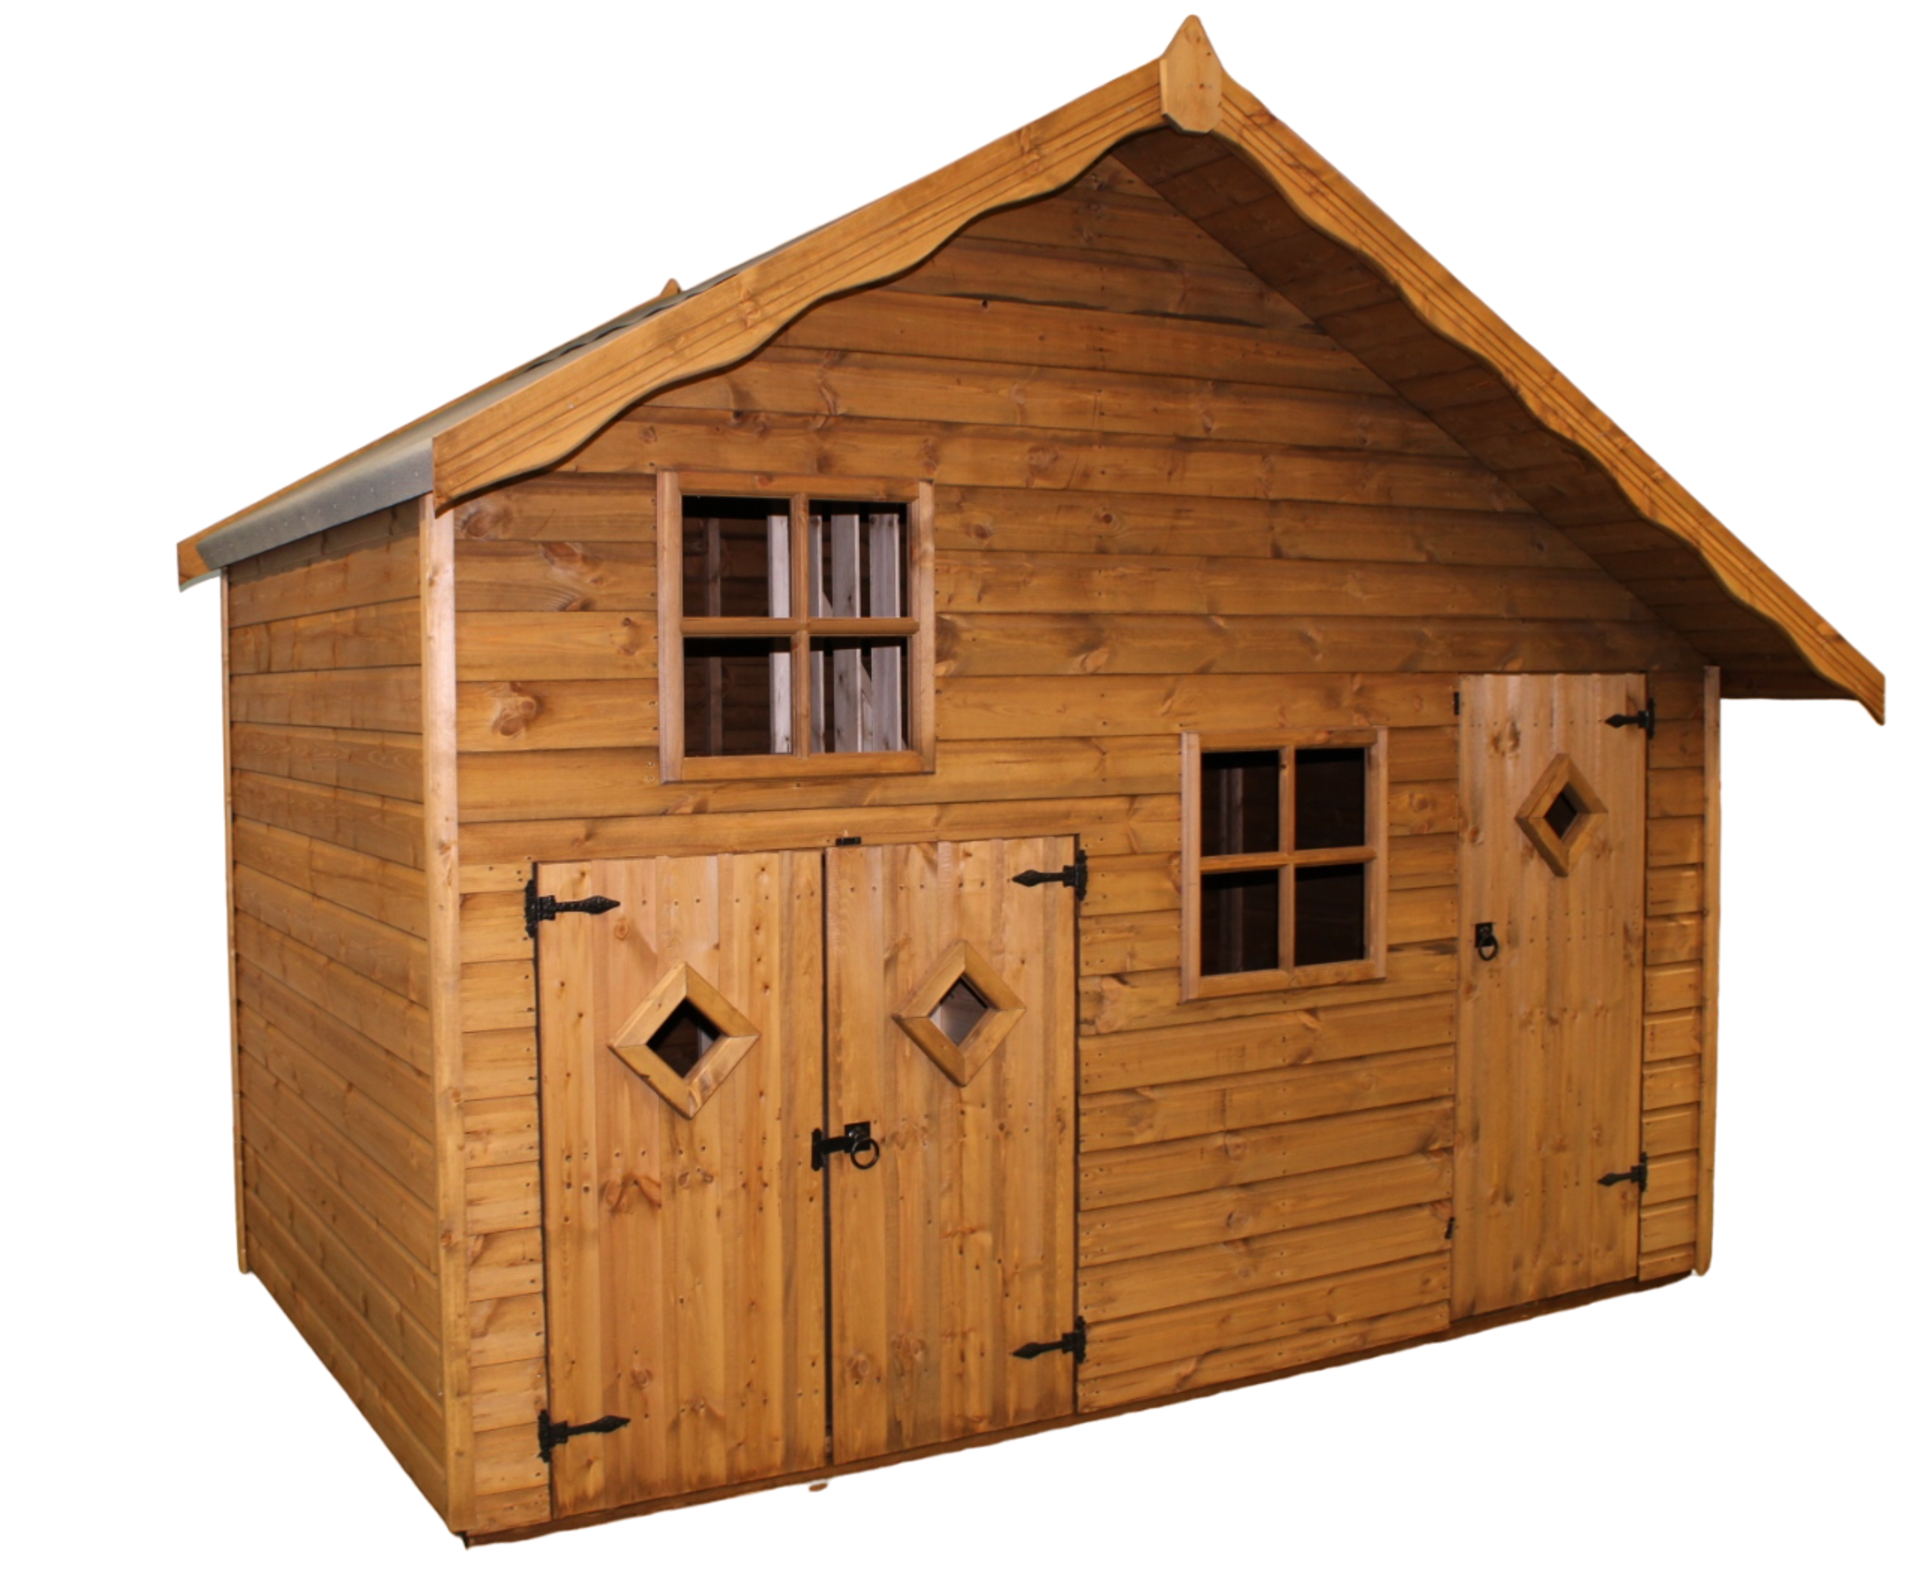 16 6/19 6x10 BRAND NEW kids playhouse shed, Standard 16mm Nominal Cladding £ 2,880